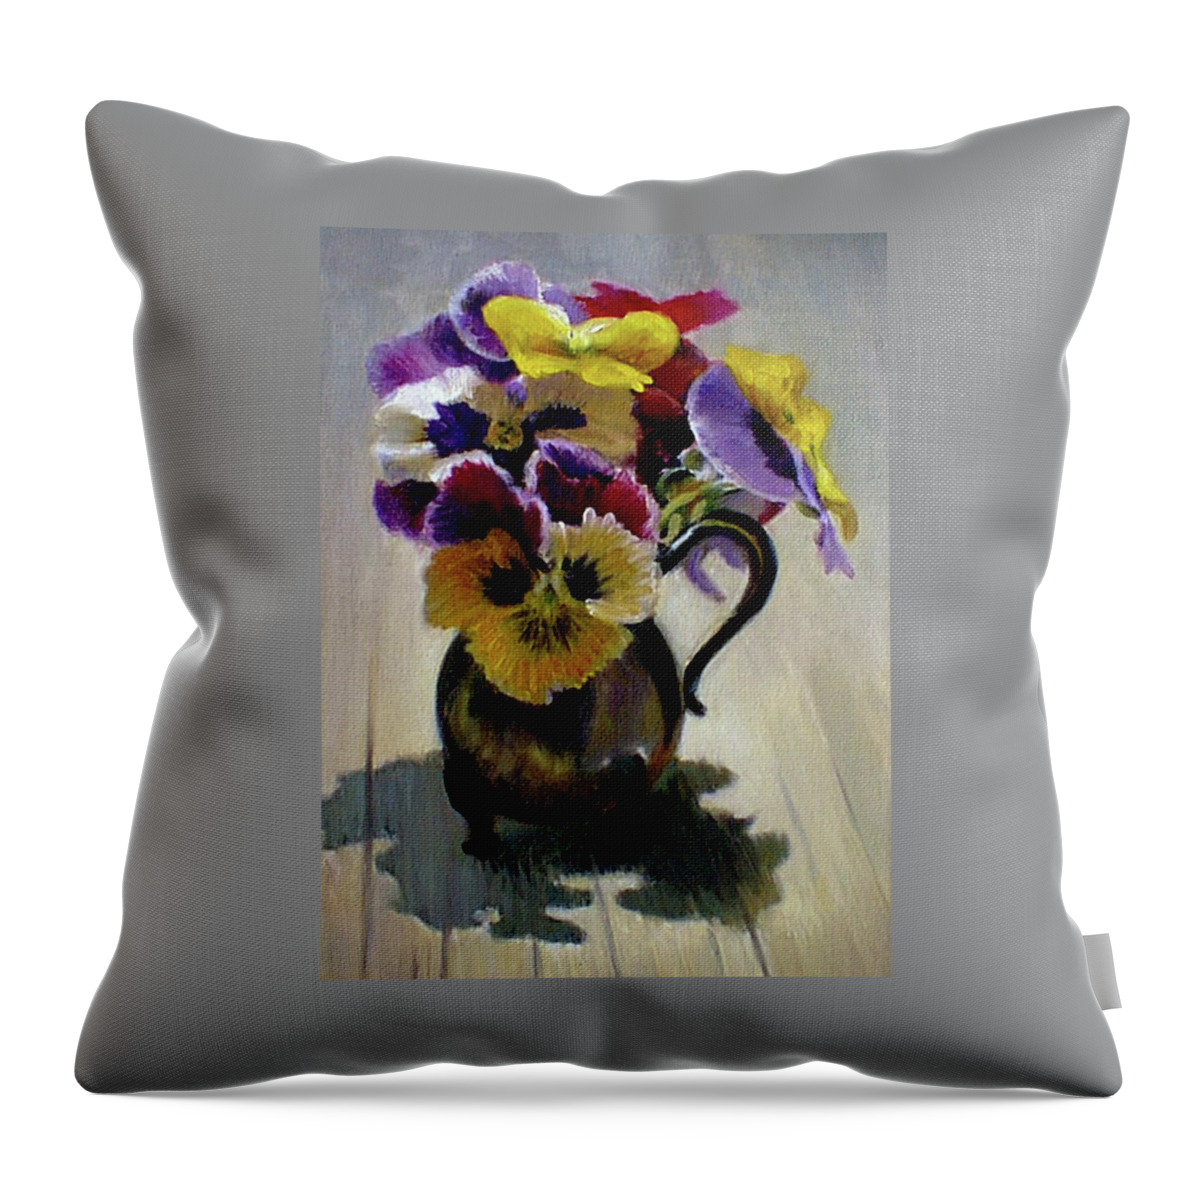 Pansies Throw Pillow featuring the painting Pansies by Marie Witte